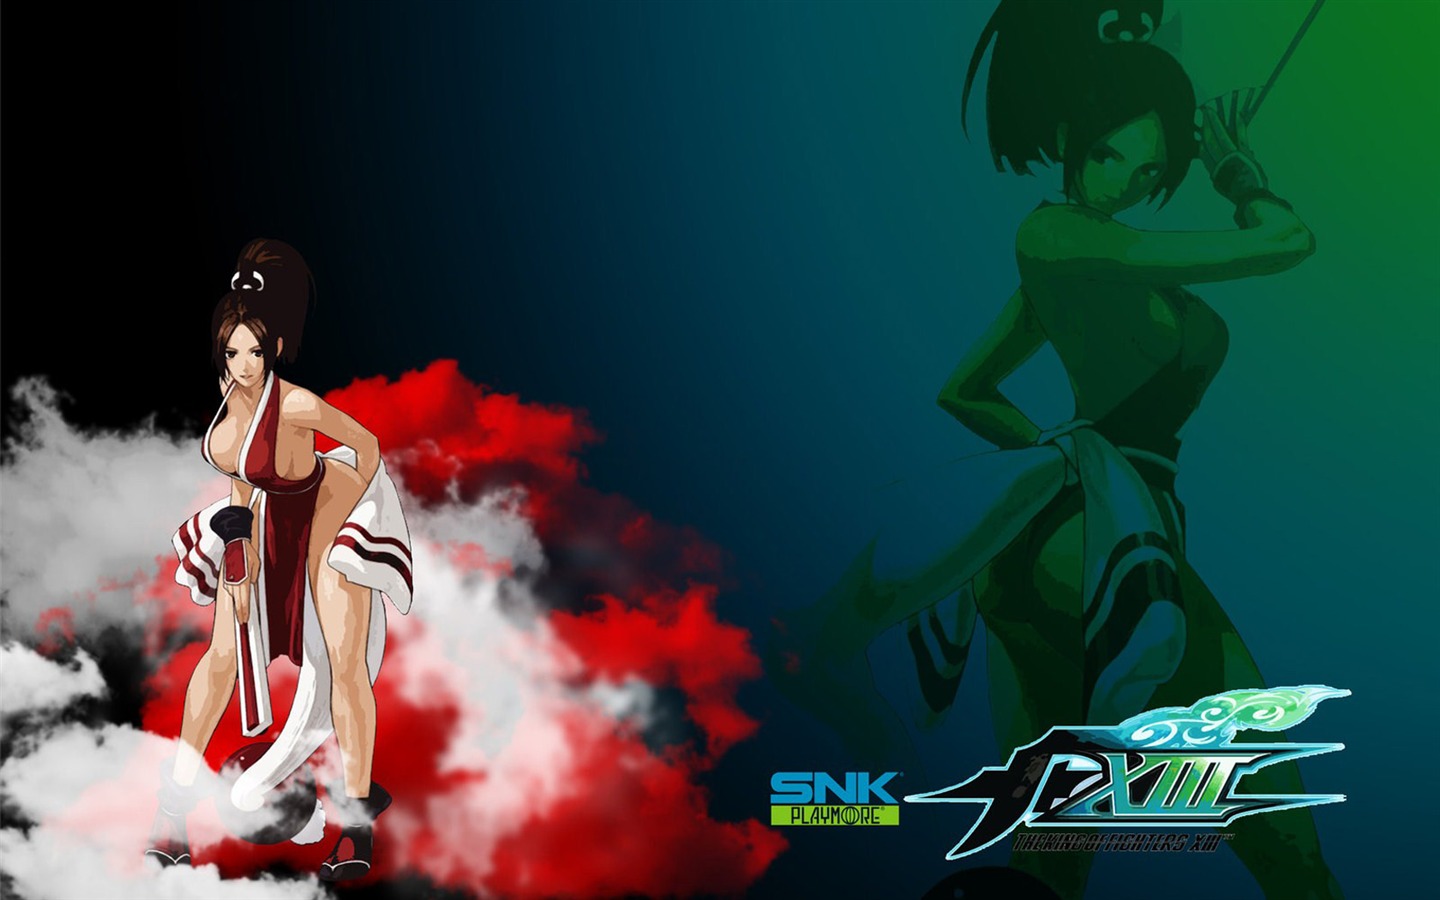 Le roi de wallpapers Fighters XIII #16 - 1440x900